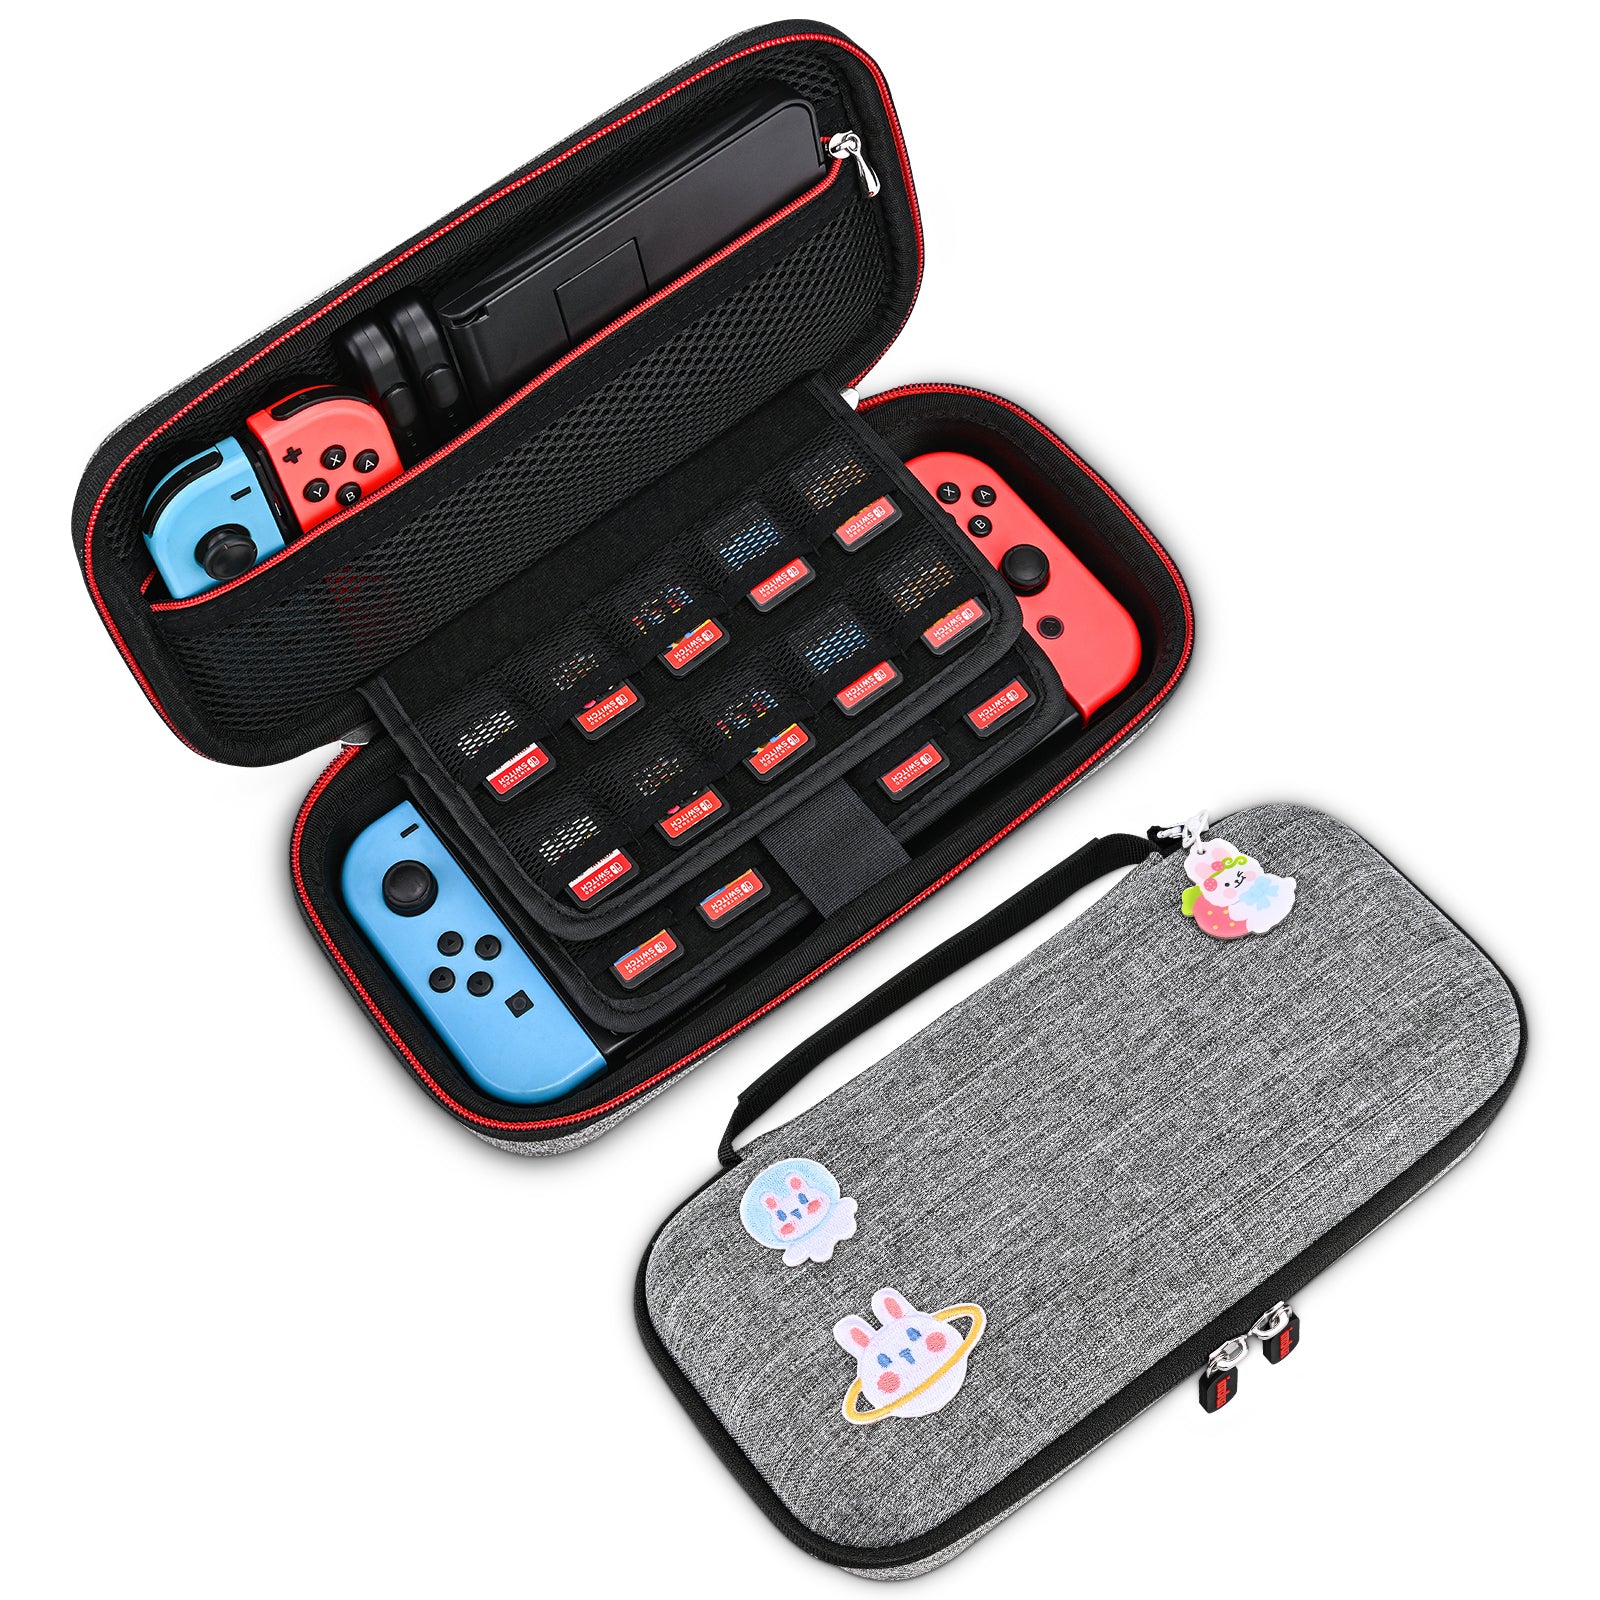 innoAura Switch Case Hard Carrying Case for Nintendo Switch with 18 Accessories